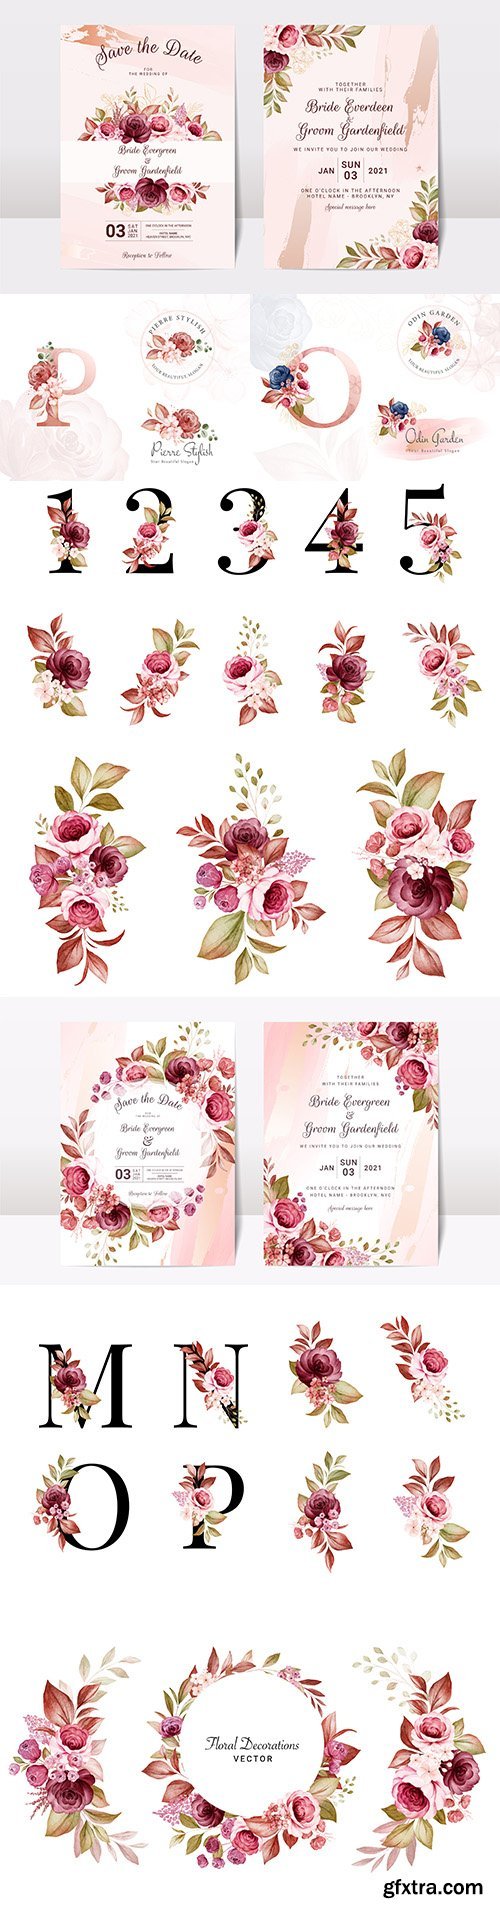 Floral wedding invitation template with elegant burgundy and brown roses